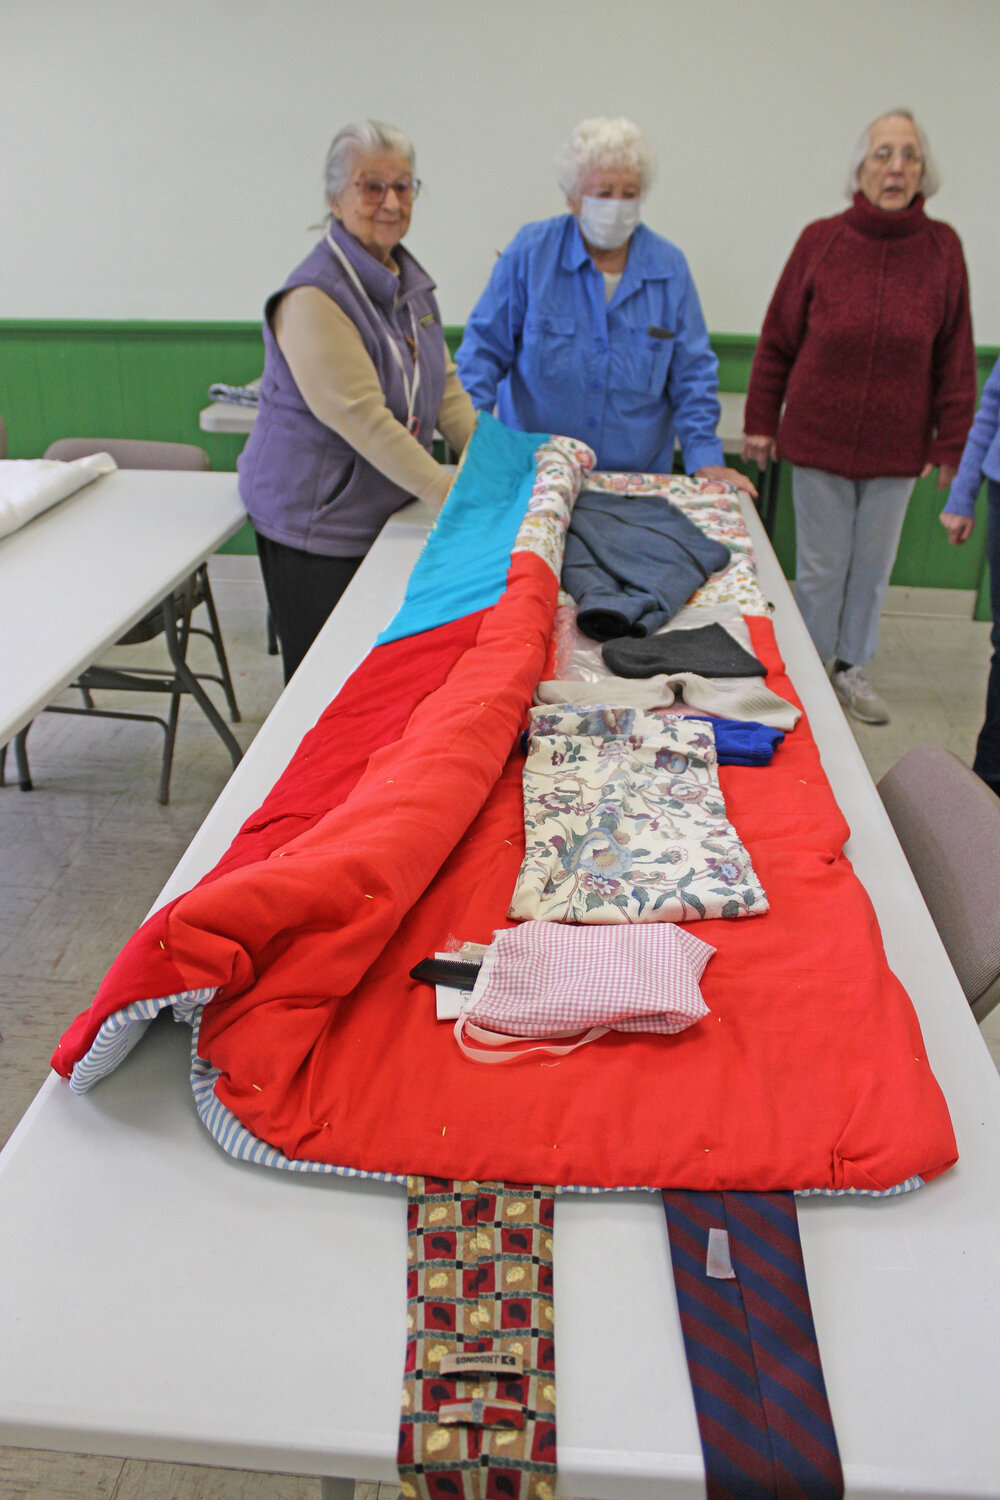 Sleeping bags are distributed with hygiene products, hats, gloves, socks, scarves and pillow covers — whatever has been donated.